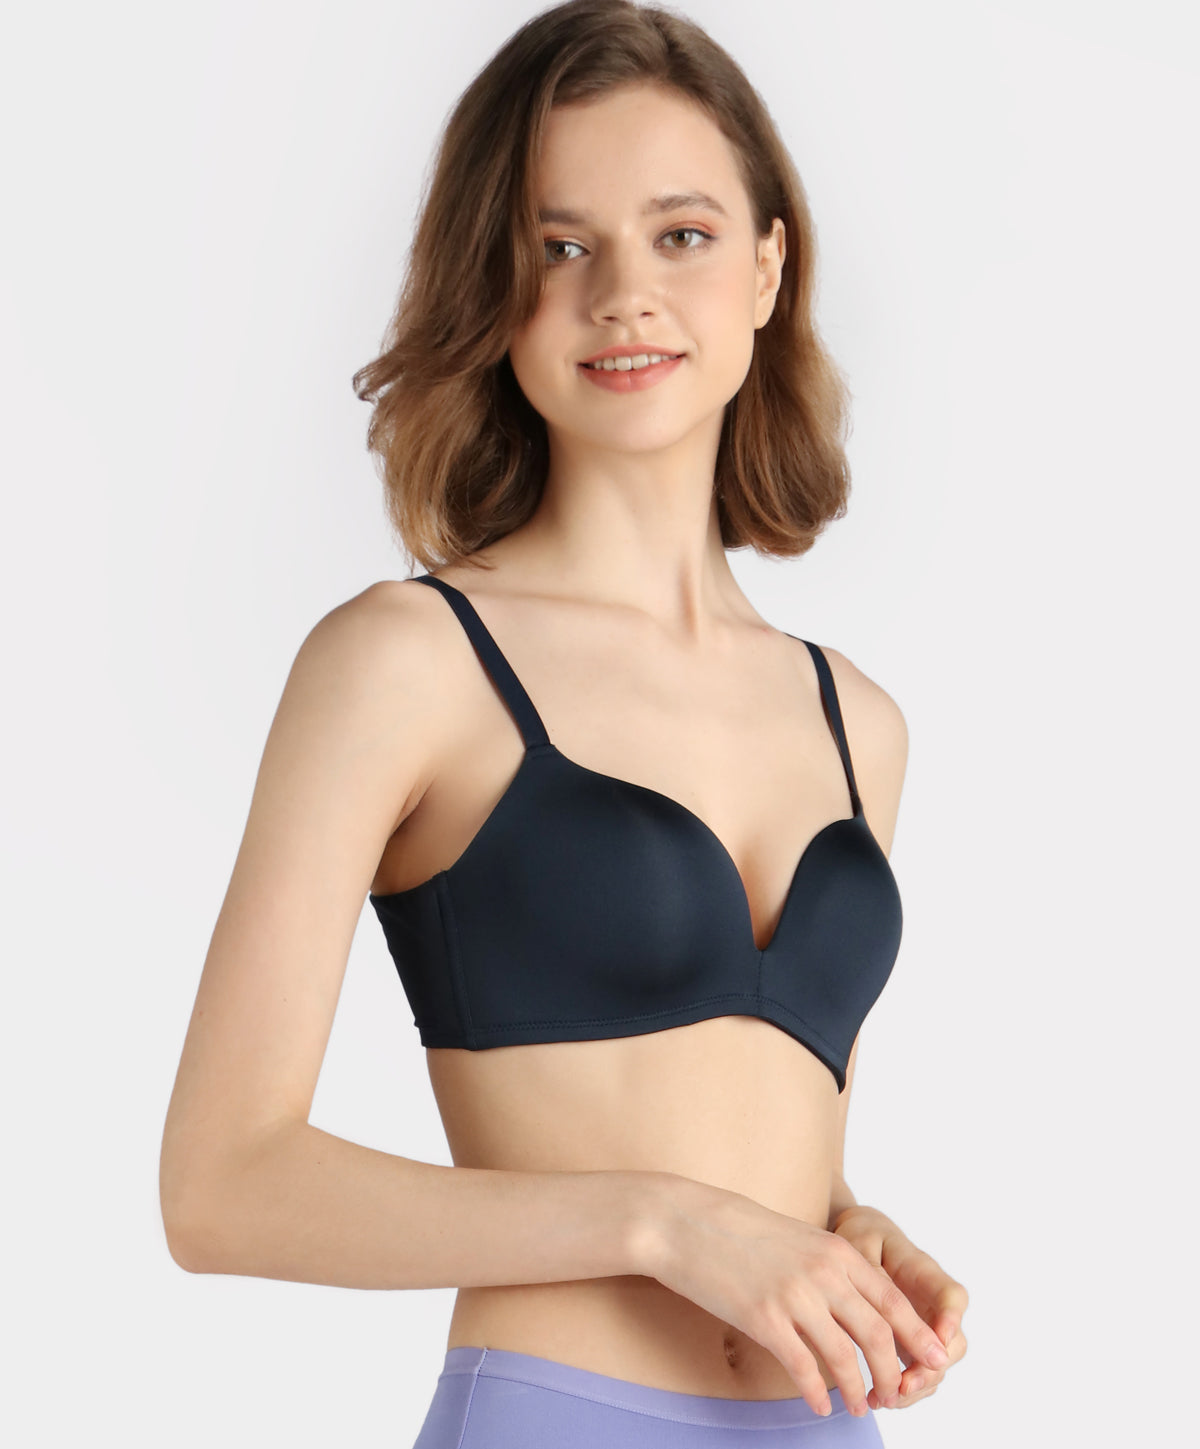 Pierre Cardin Underwire Extra Support Double Push-Up Bra 6329 (B